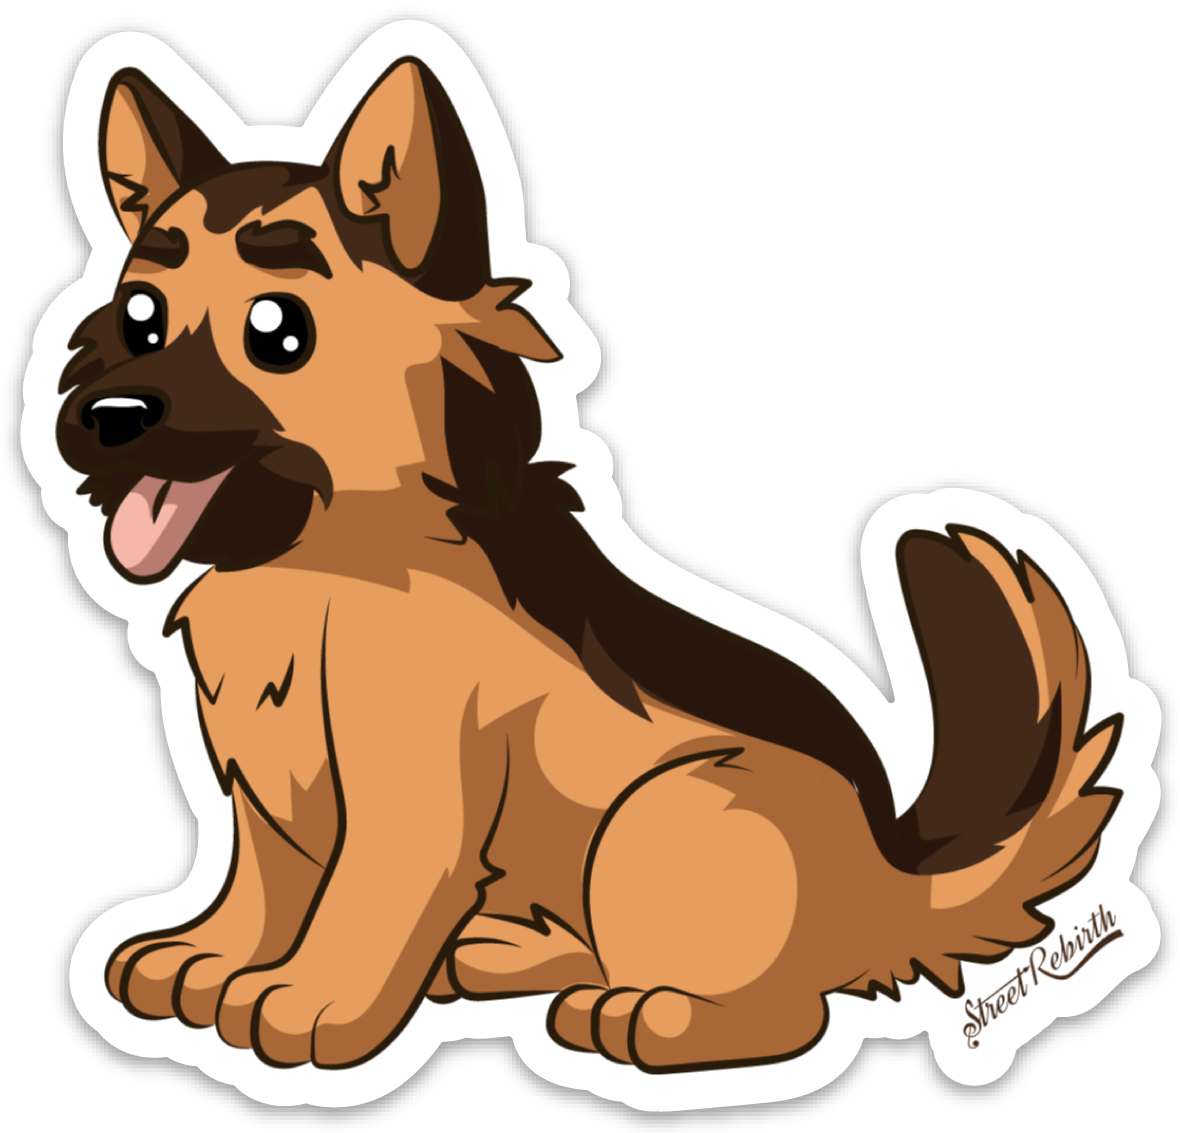 German Shepherd PUN STICKER – ONE 4 INCH WATER PROOF VINYL STICKER – FOR HYDRO FLASK, SKATEBOARD, LAPTOP, PLANNER, CAR, COLLECTING, GIFTING